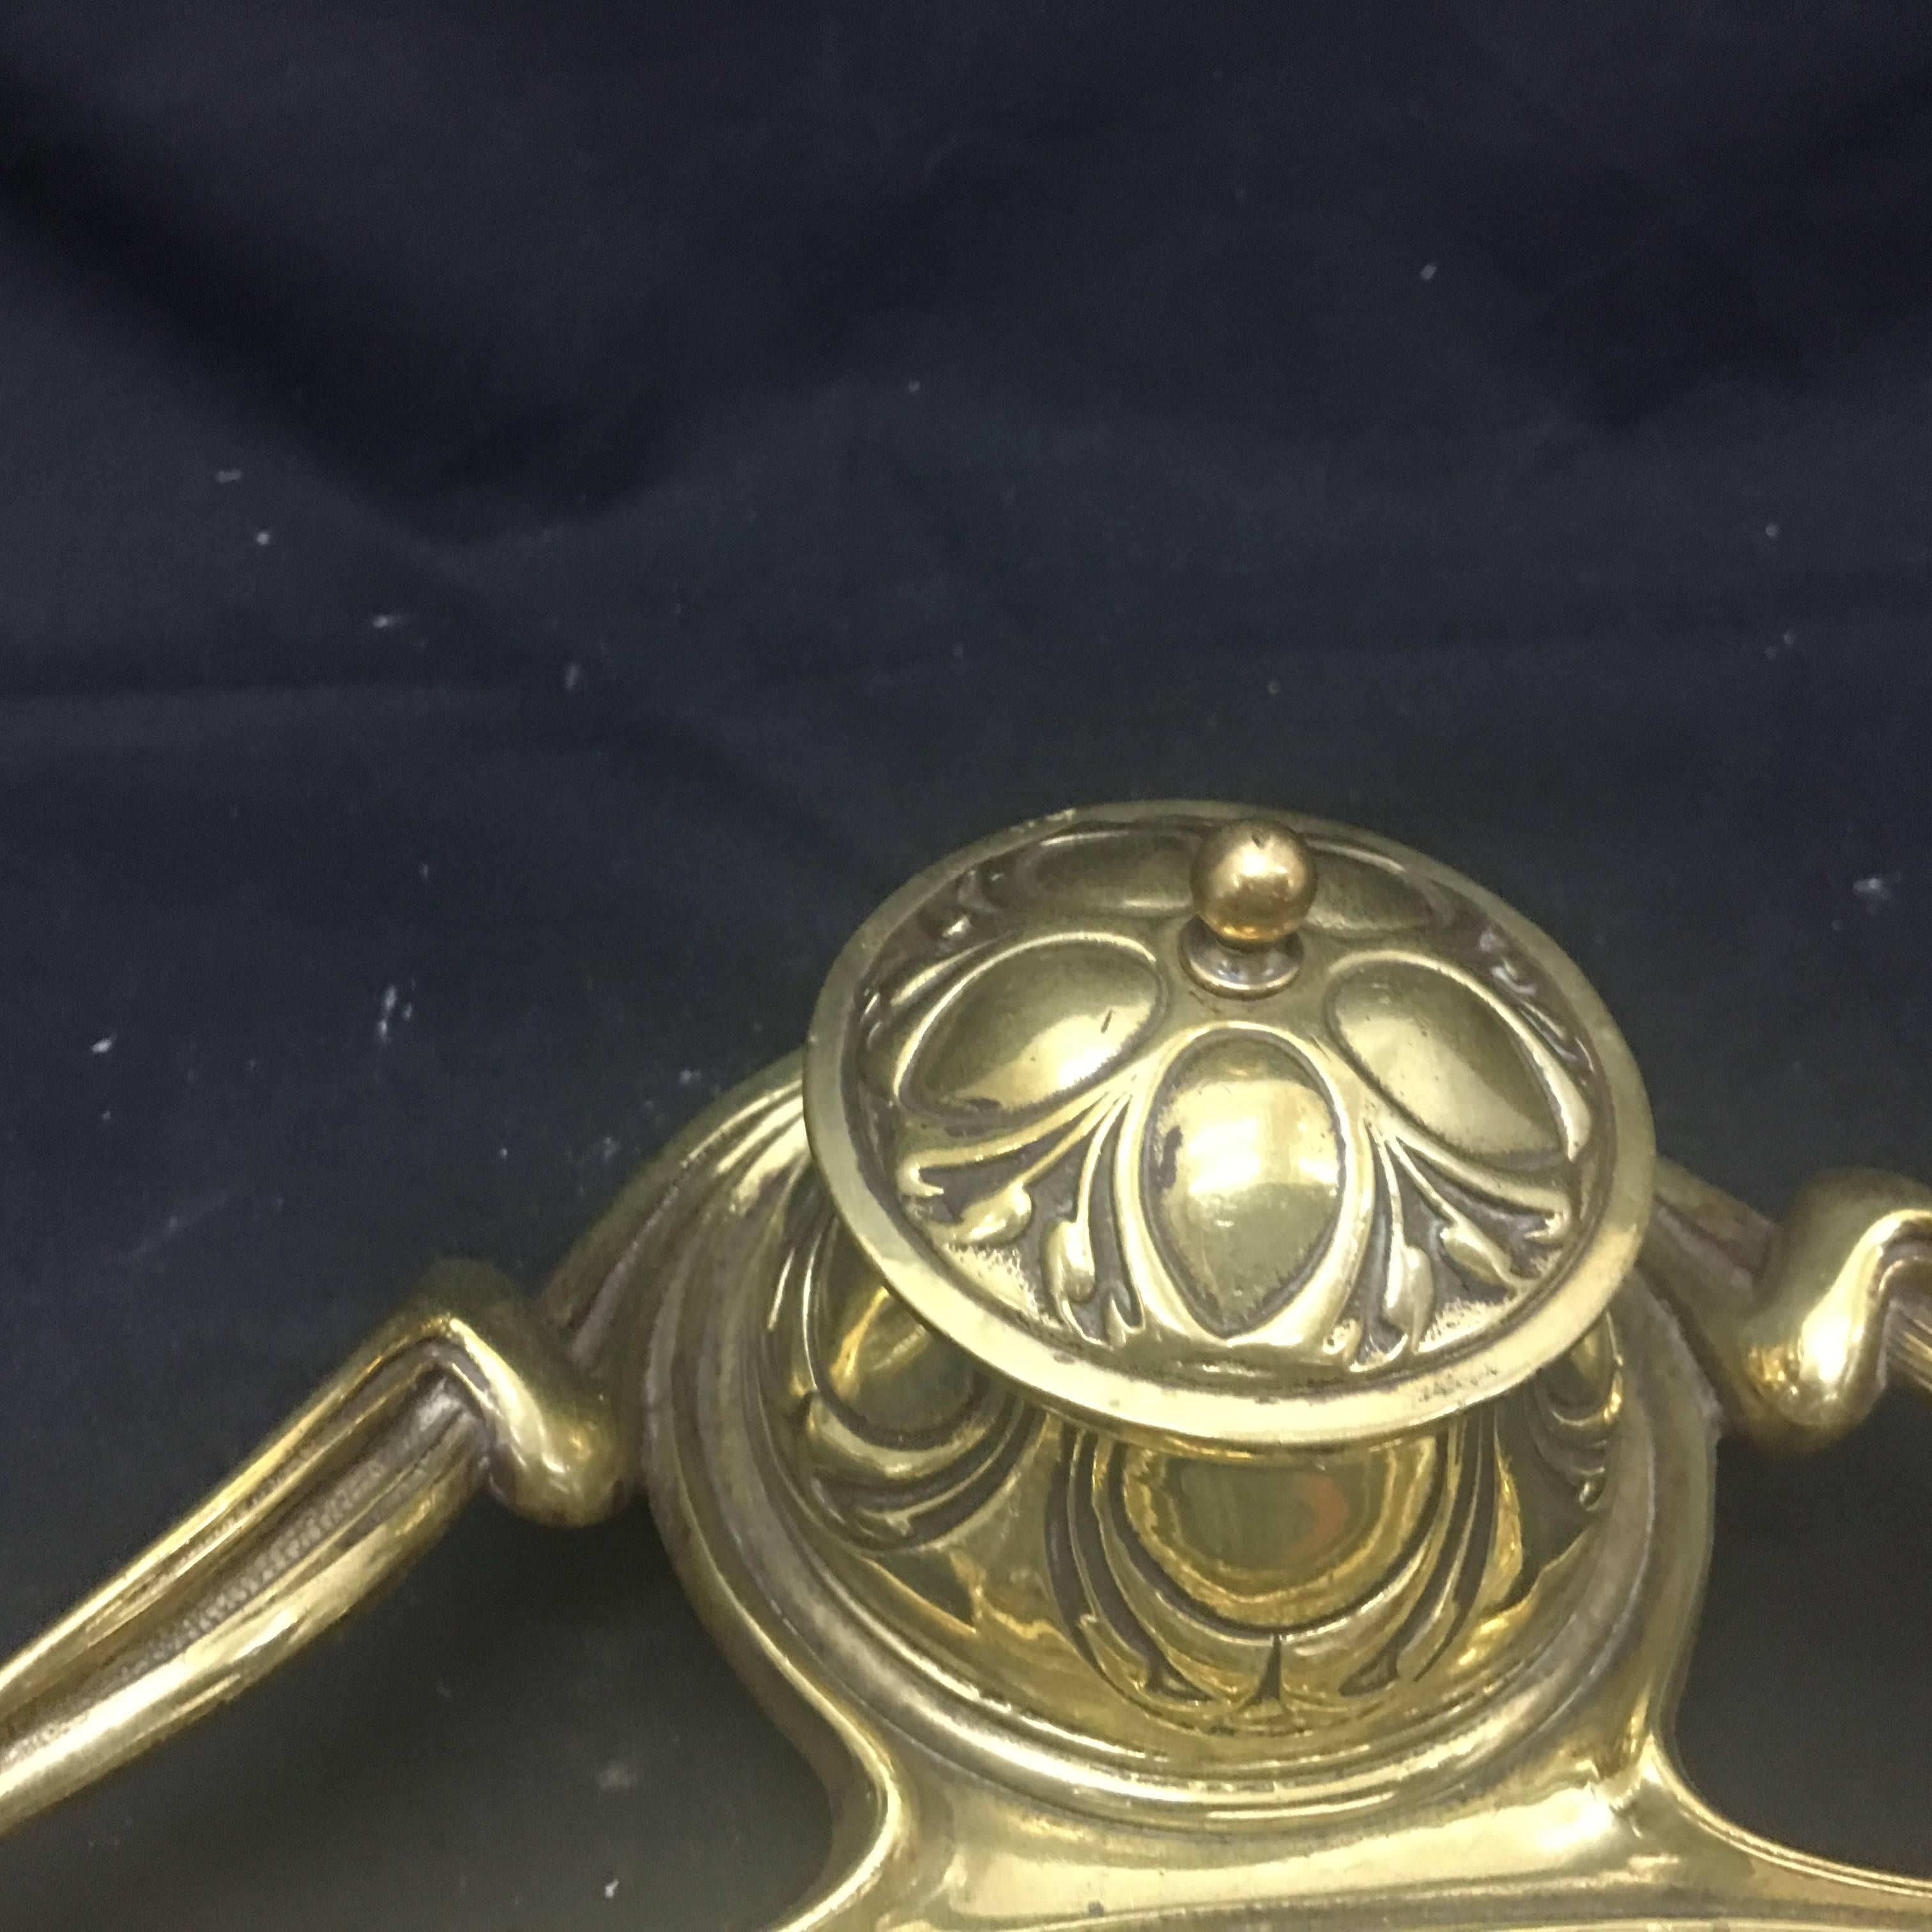 Particular brass inkwell probably made in England, nice conditions overall, only the cover of the glass probably was hinged with the base but it's not a problem because rested well.